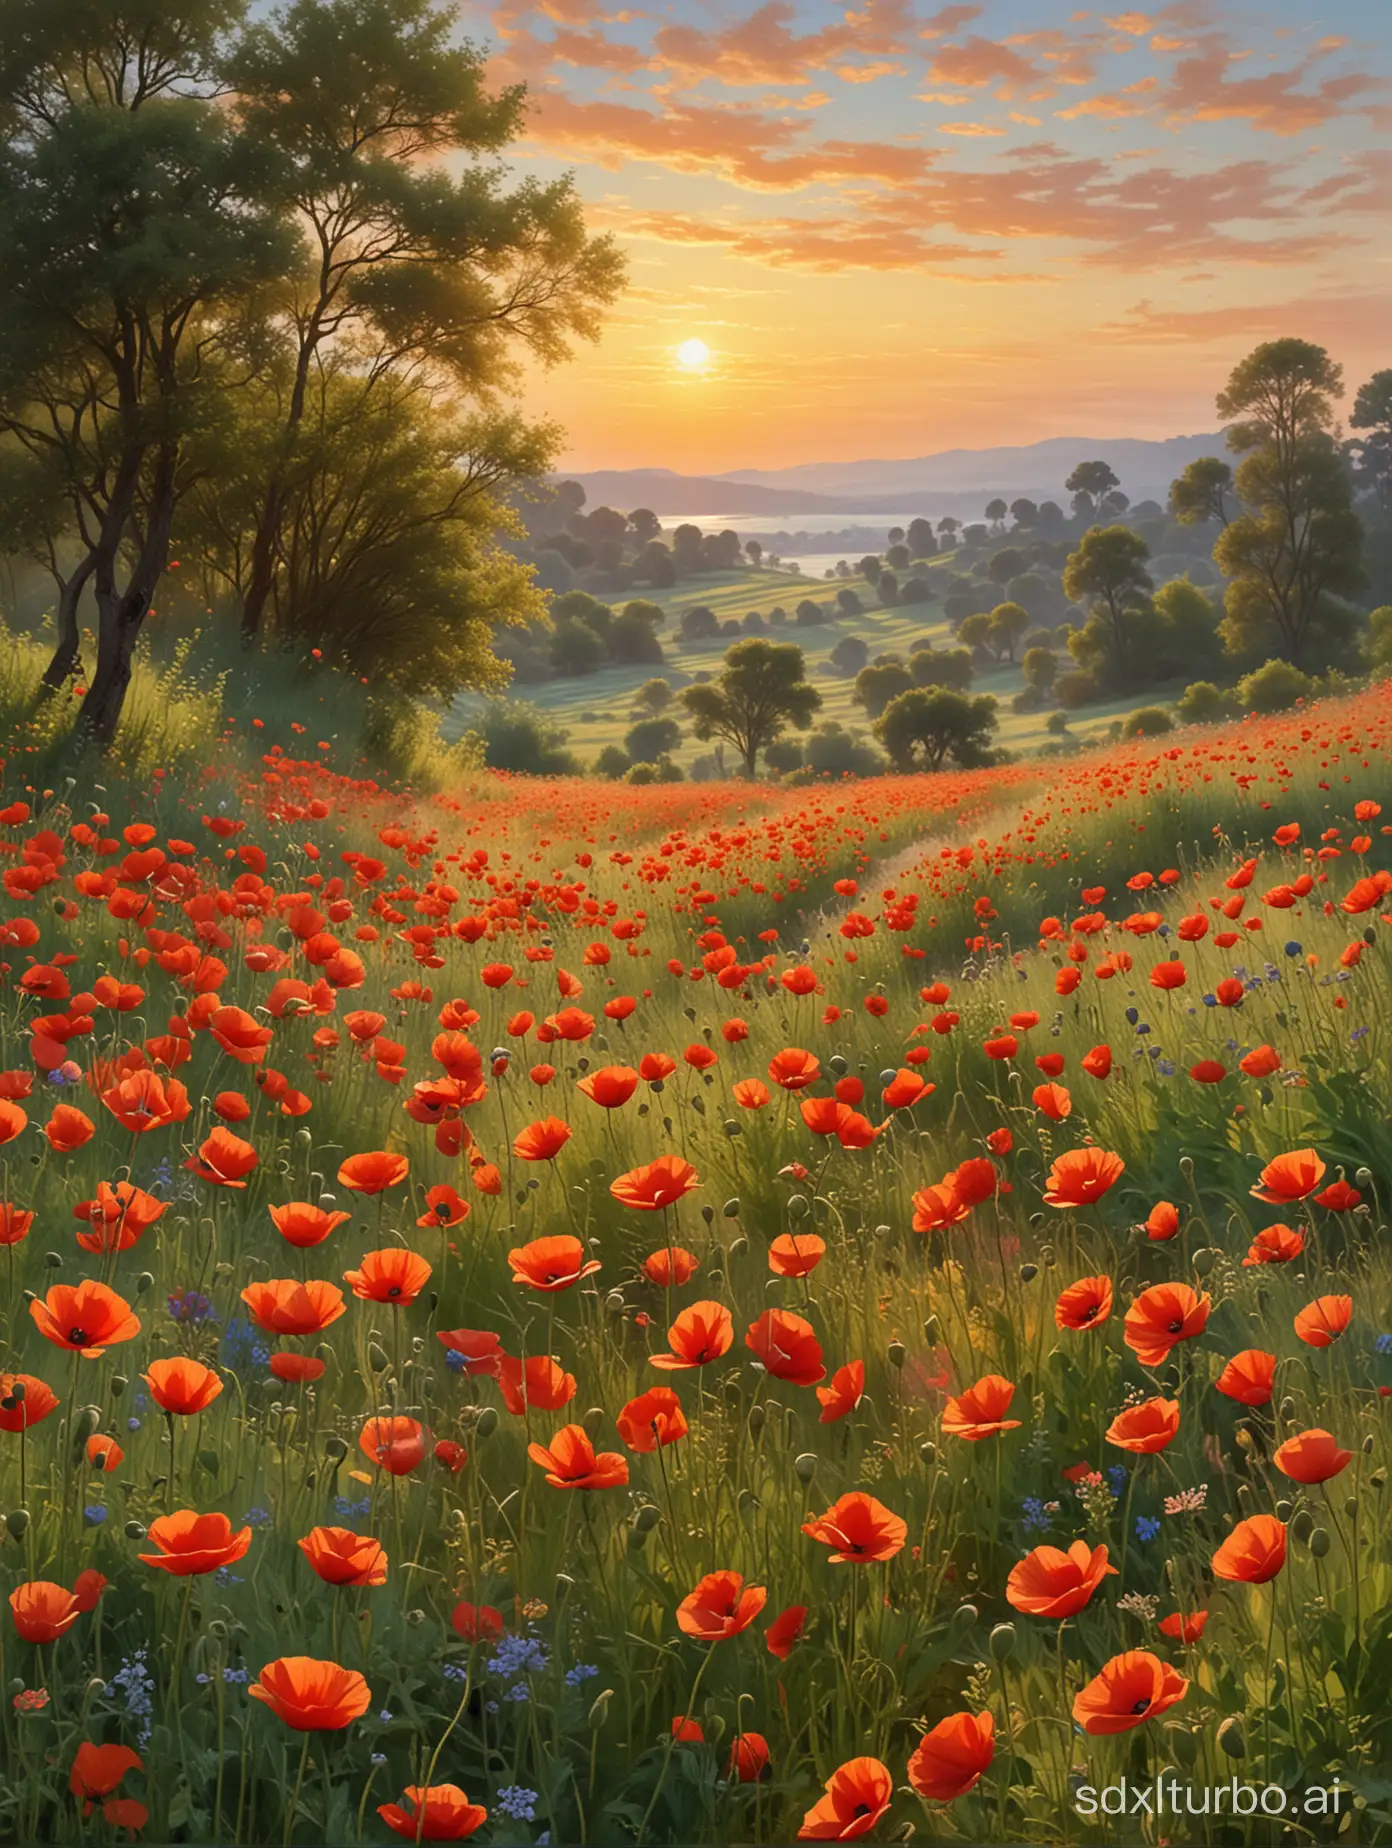 "Imagine a picturesque countryside scene where an extensive field of vibrant red poppies stands out, swayed by gentle breezes that make the flowers dance in harmony. The golden rays of the sun illuminate the landscape, bestowing upon it an aura of serenity and untouched beauty. Each poppy sways gracefully in the breeze, their scarlet petals catching the light and creating a mesmerizing display of color. The air is filled with the delicate fragrance of wildflowers, adding to the enchantment of the scene. As the sun sets, casting a warm glow over the meadow, the beauty of the moment is heightened, as if time itself has paused to admire the scene. It's a scene straight out of a dream, reminiscent of the idyllic landscapes painted by artists like Claude Monet, who captured the essence of nature's beauty with their brushstrokes."
